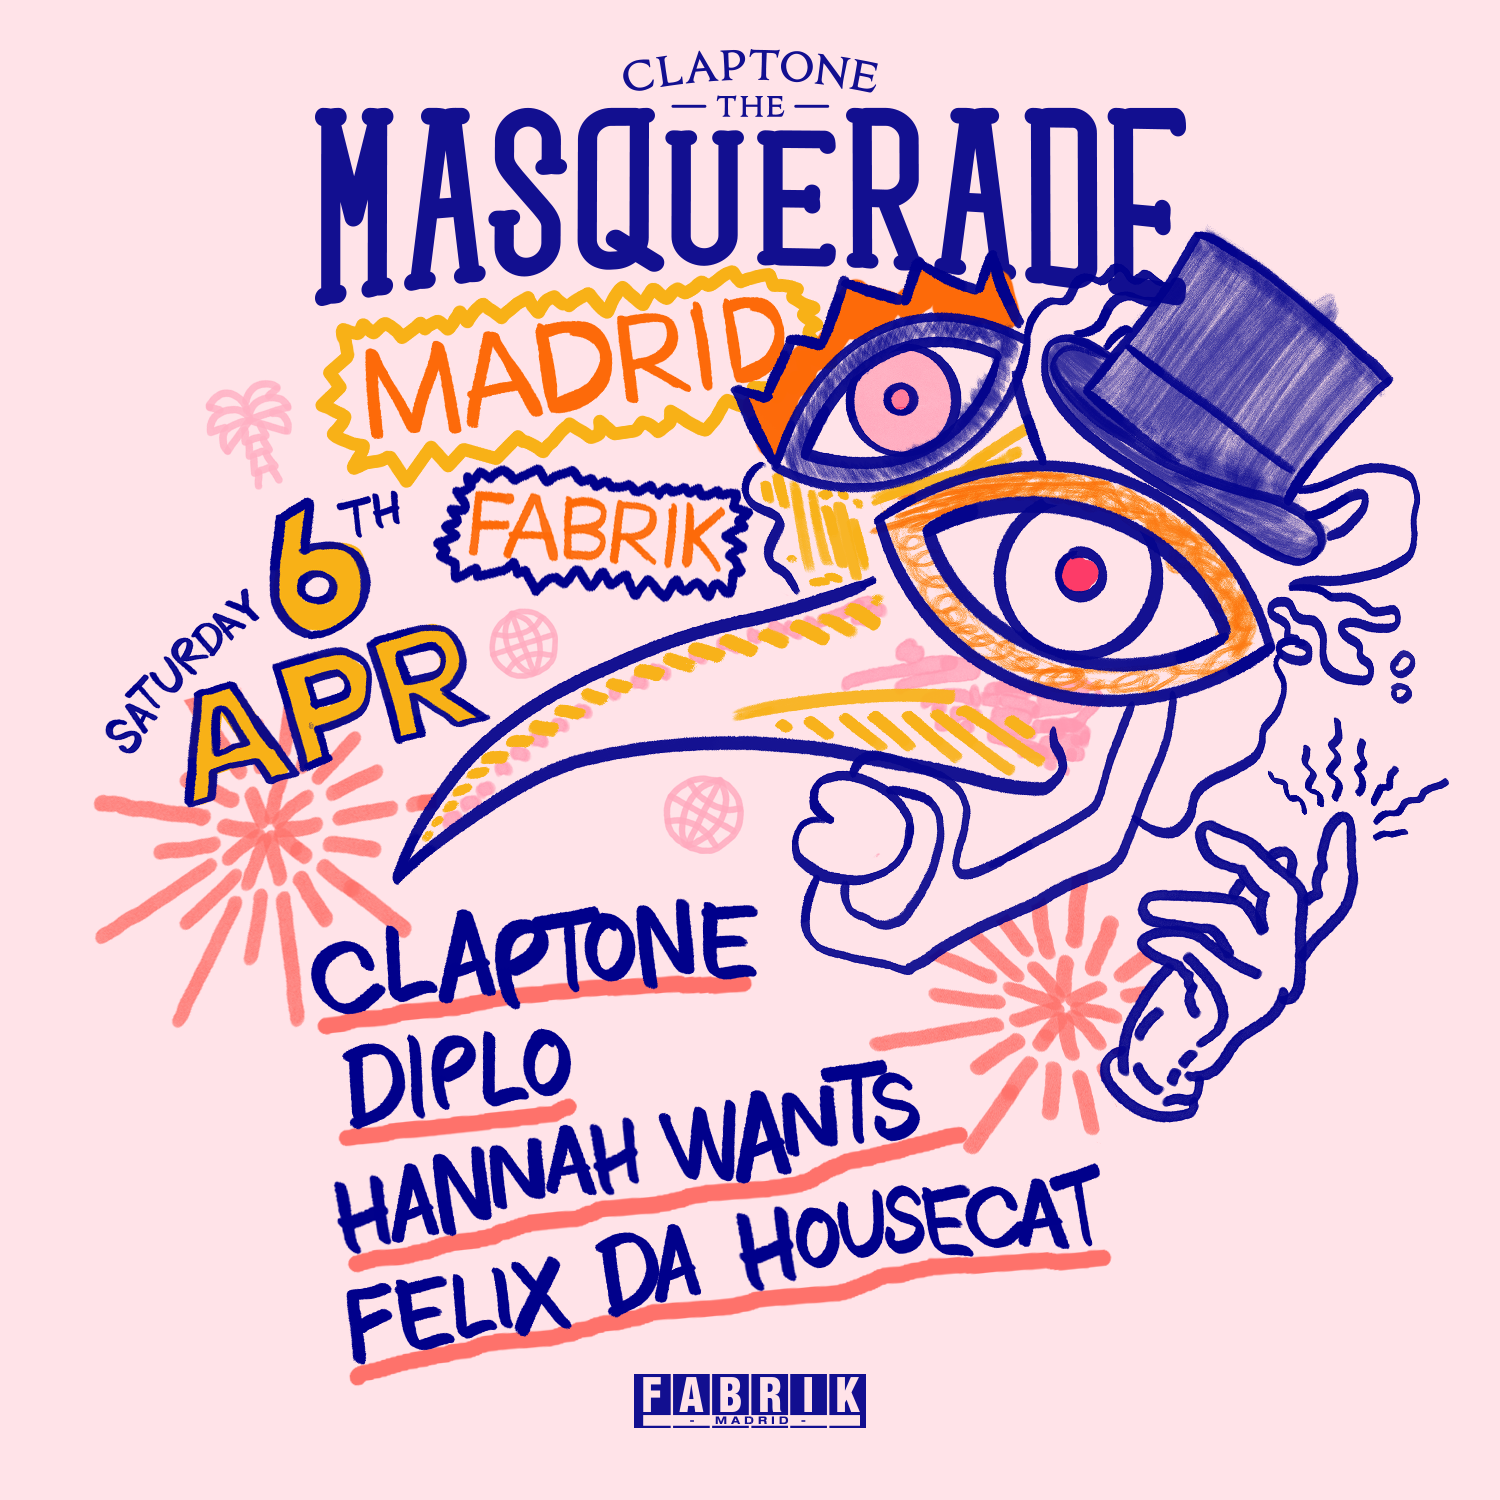 The Masquerade in Fabrik with Claptone, Diplo, Hannah Wants and Felix Da Housecat - Página frontal